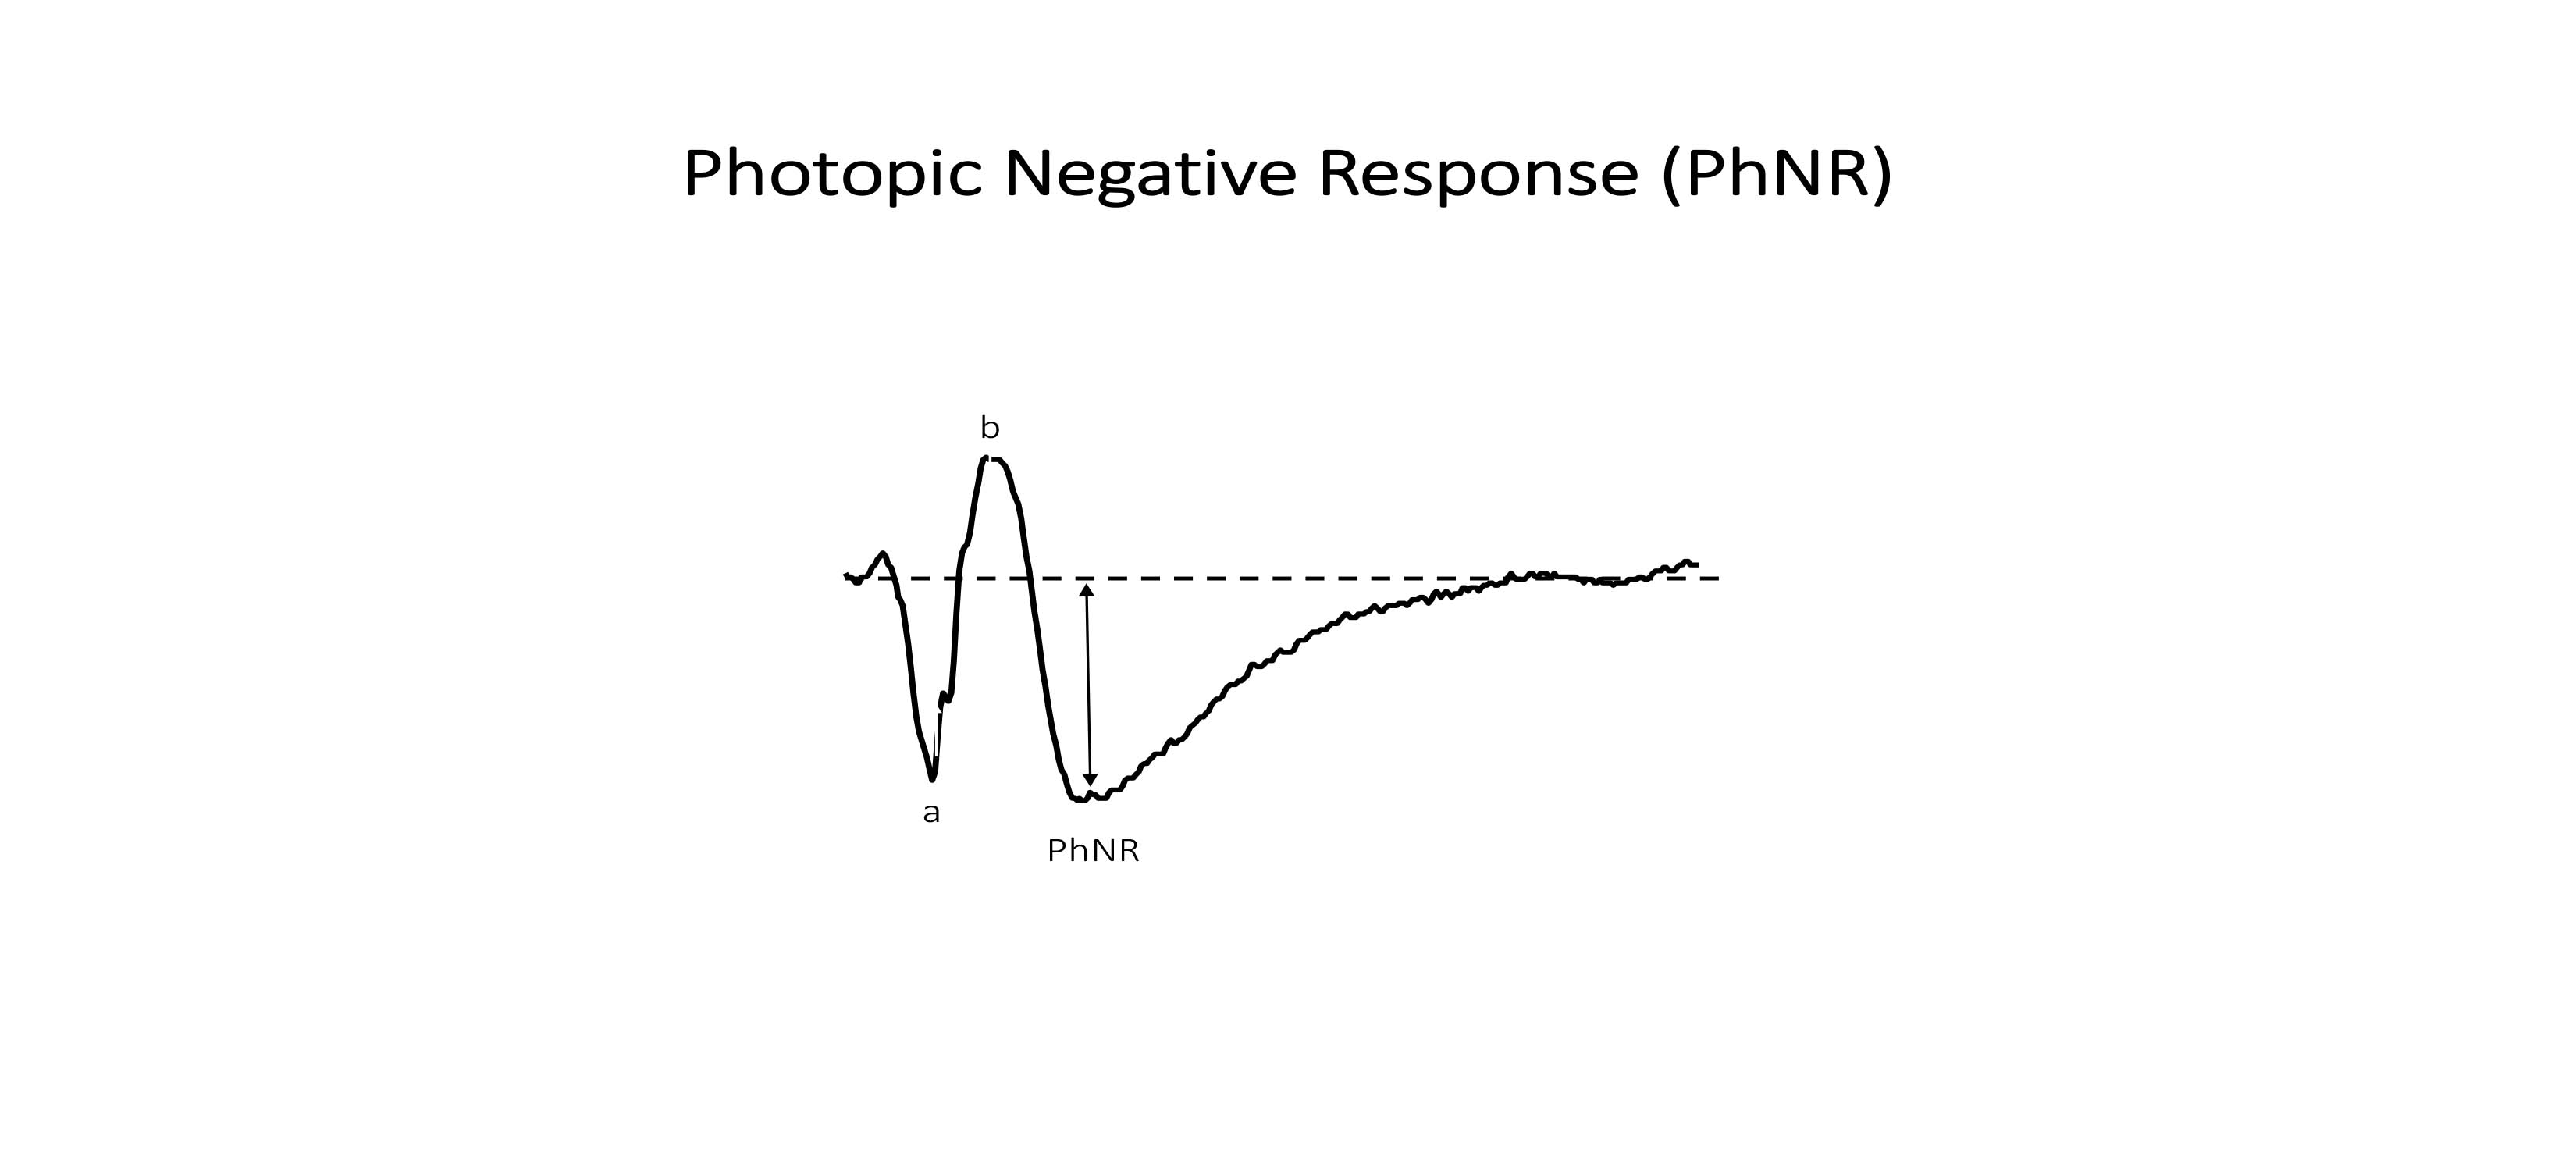 Illustration of a normal photopic negative response ERG recording